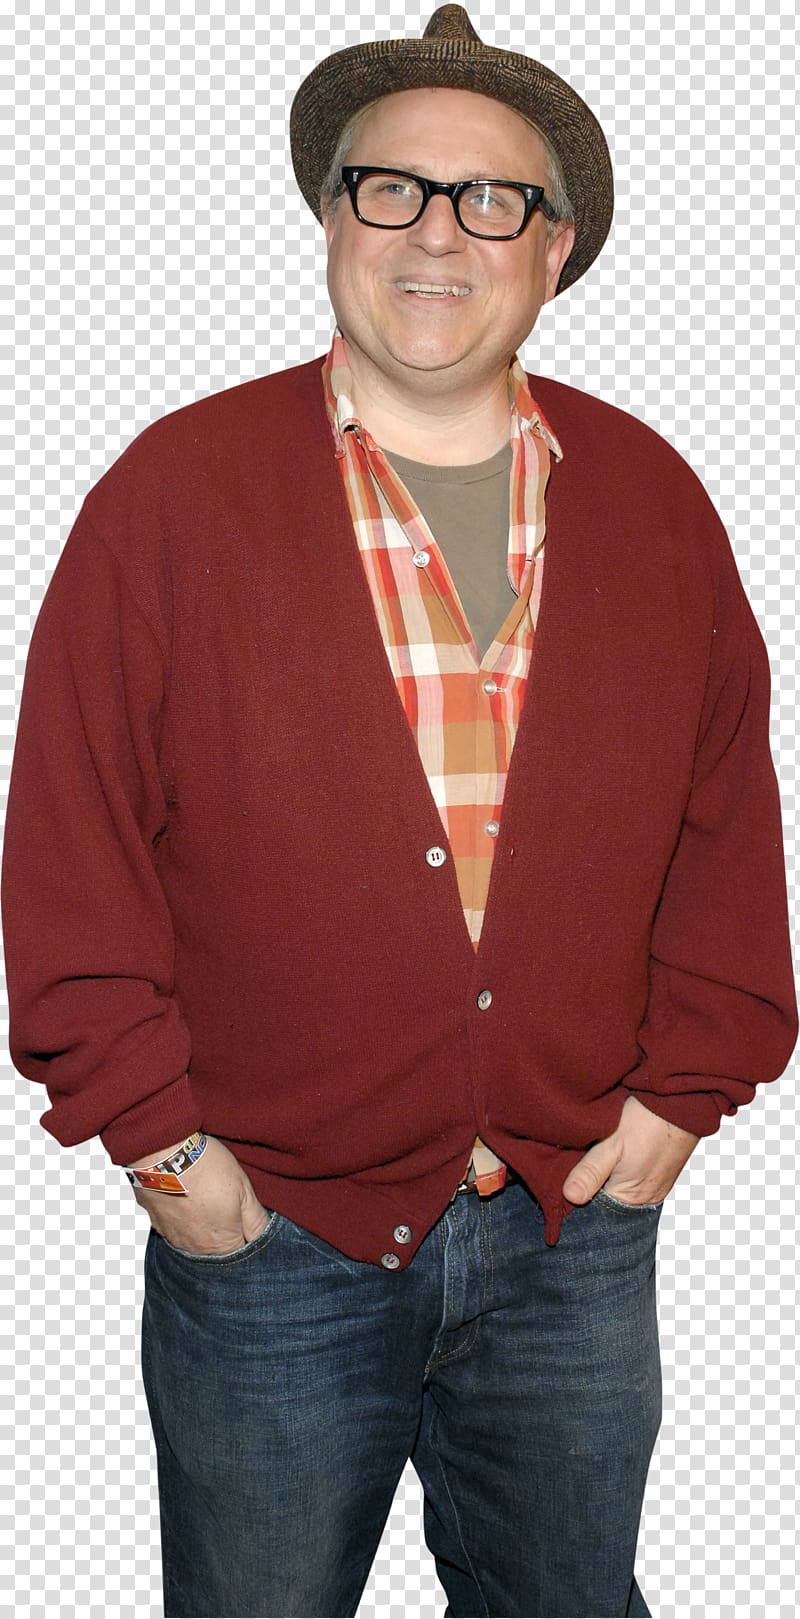 Bobcat Goldthwait The Pee-wee Herman Show Comedian, others transparent background PNG clipart